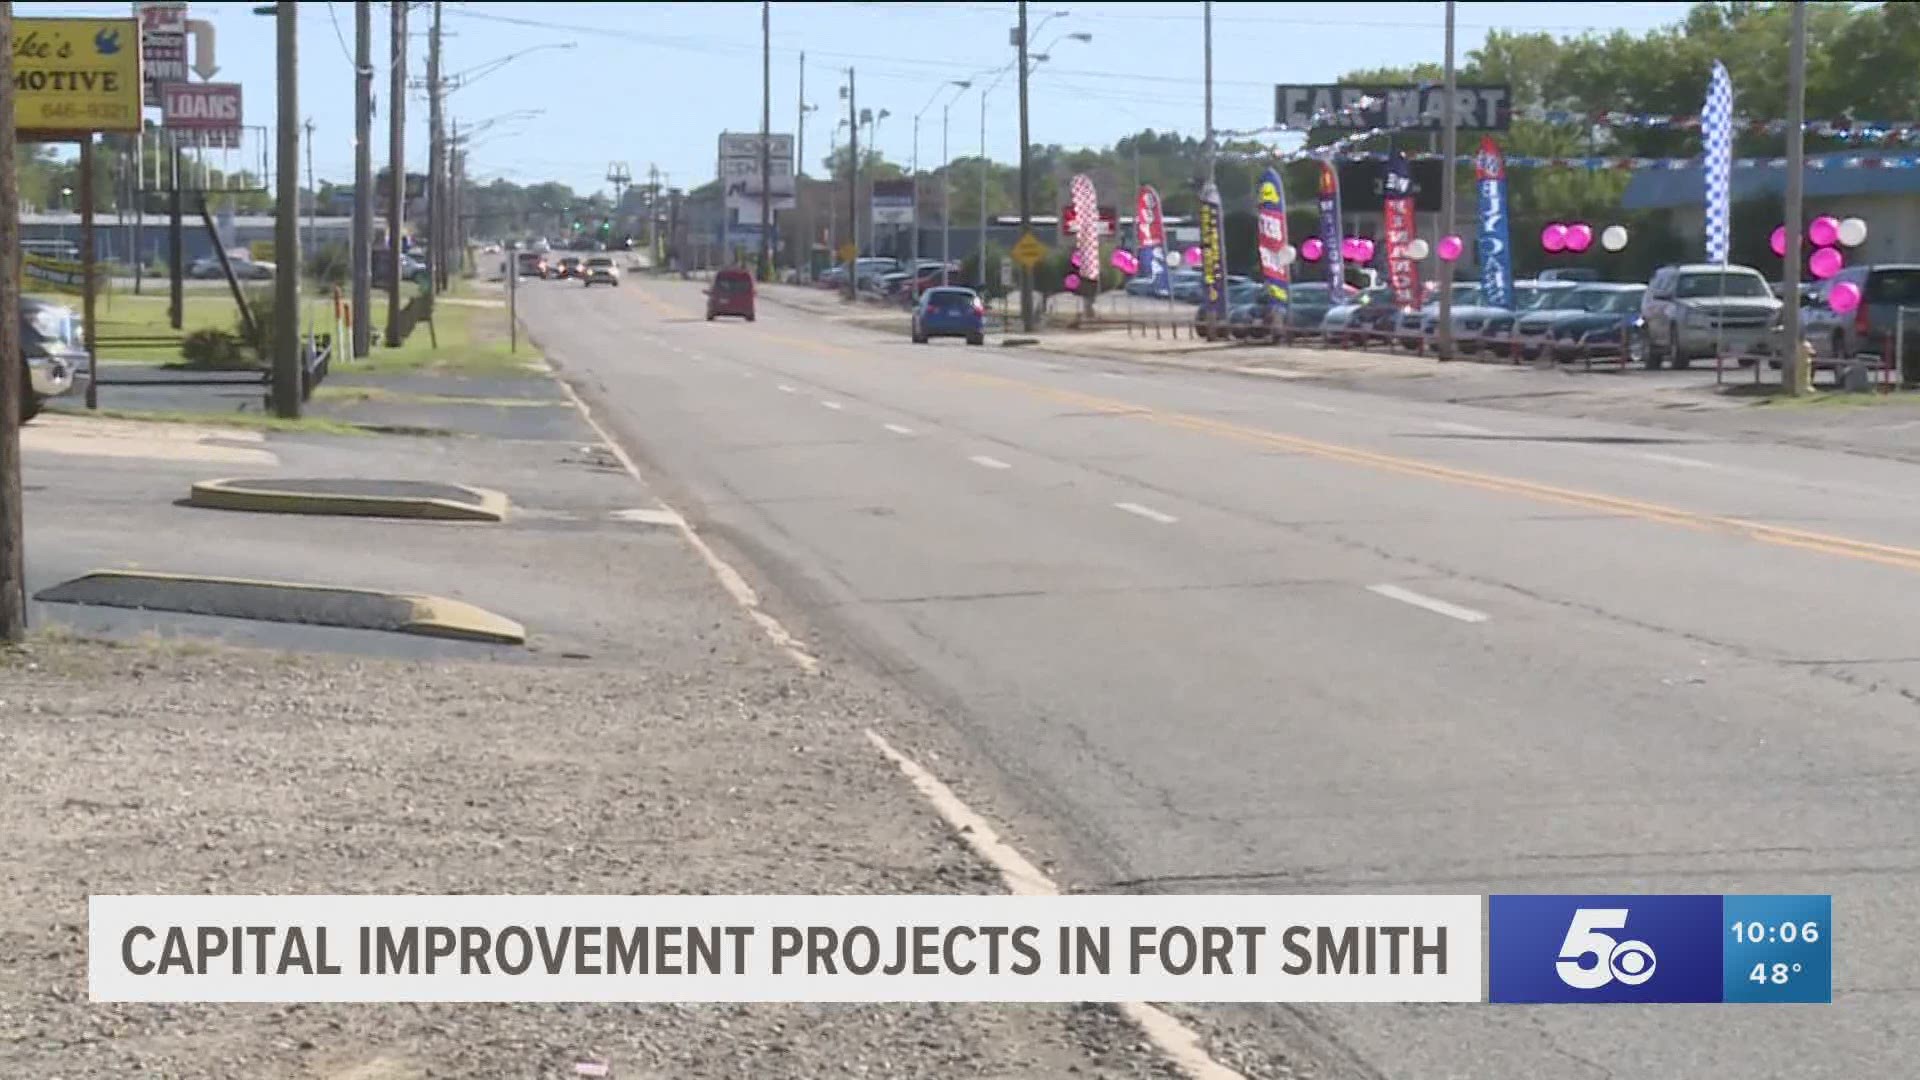 Capital improvement projects in Fort Smith